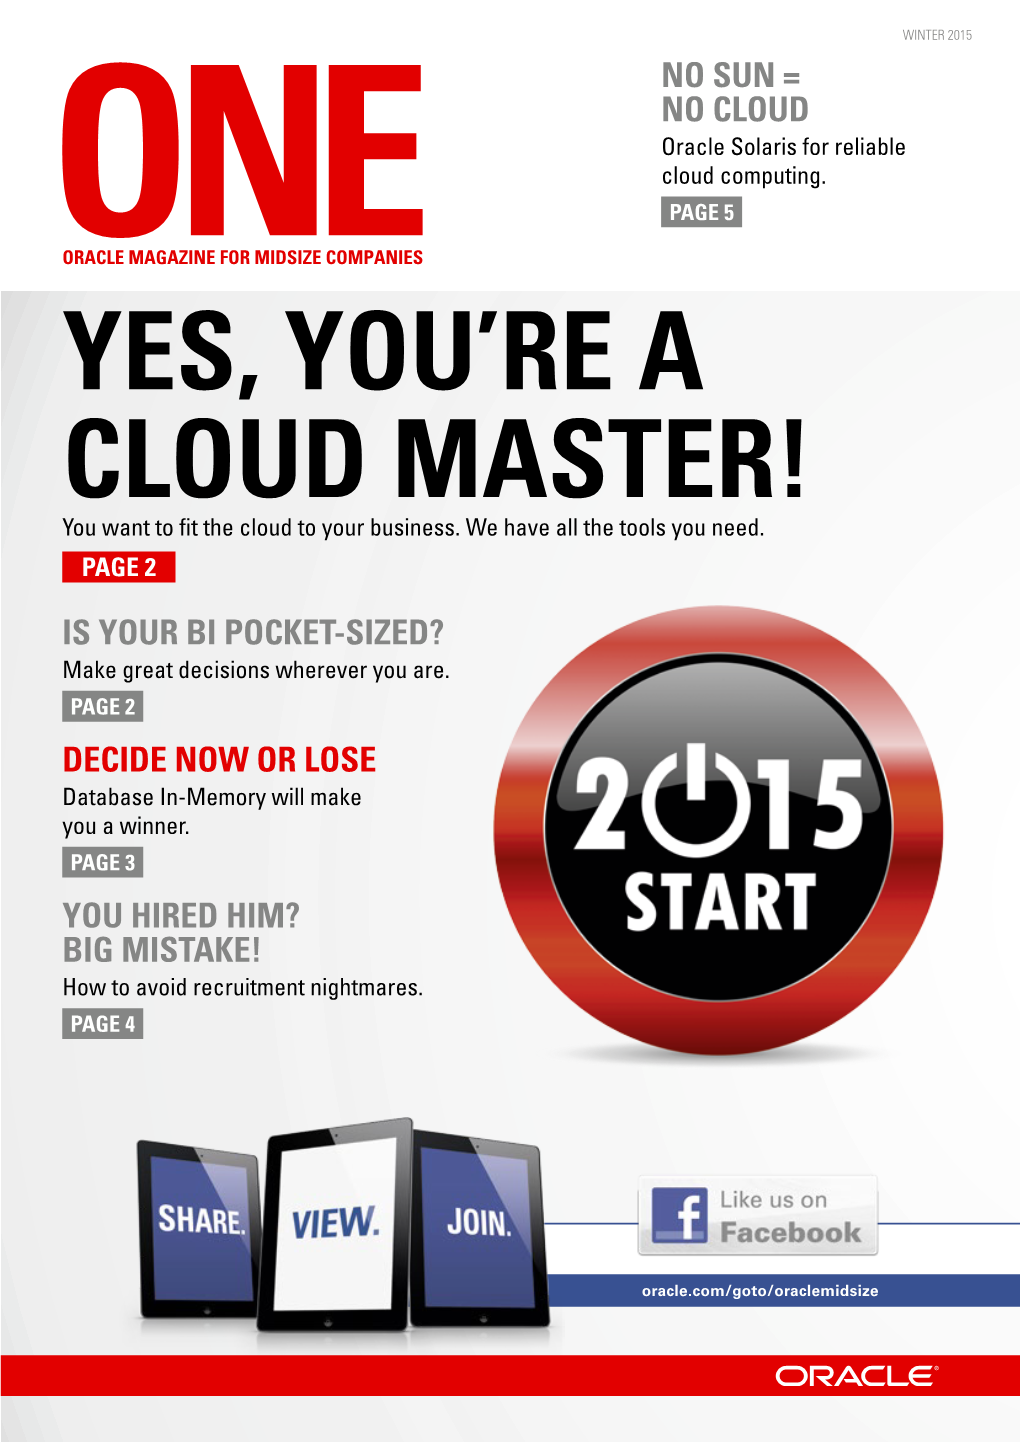 Yes, You're a Cloud Master!